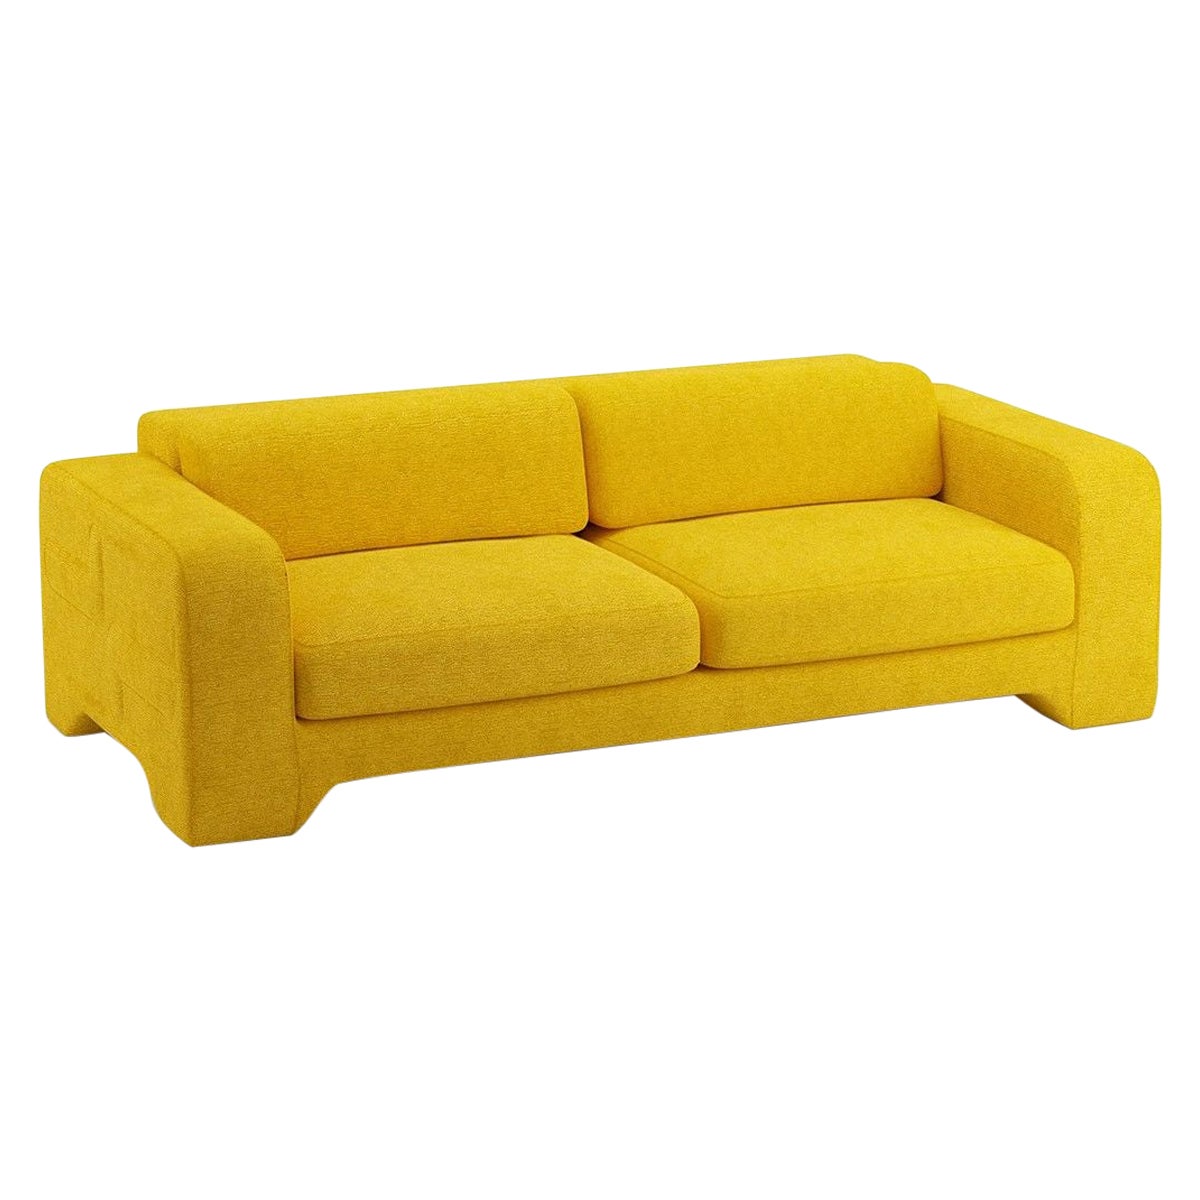 Popus Editions Giovanna 3 Seater Sofa in Corn Megeve Fabric with a Knit Effect For Sale